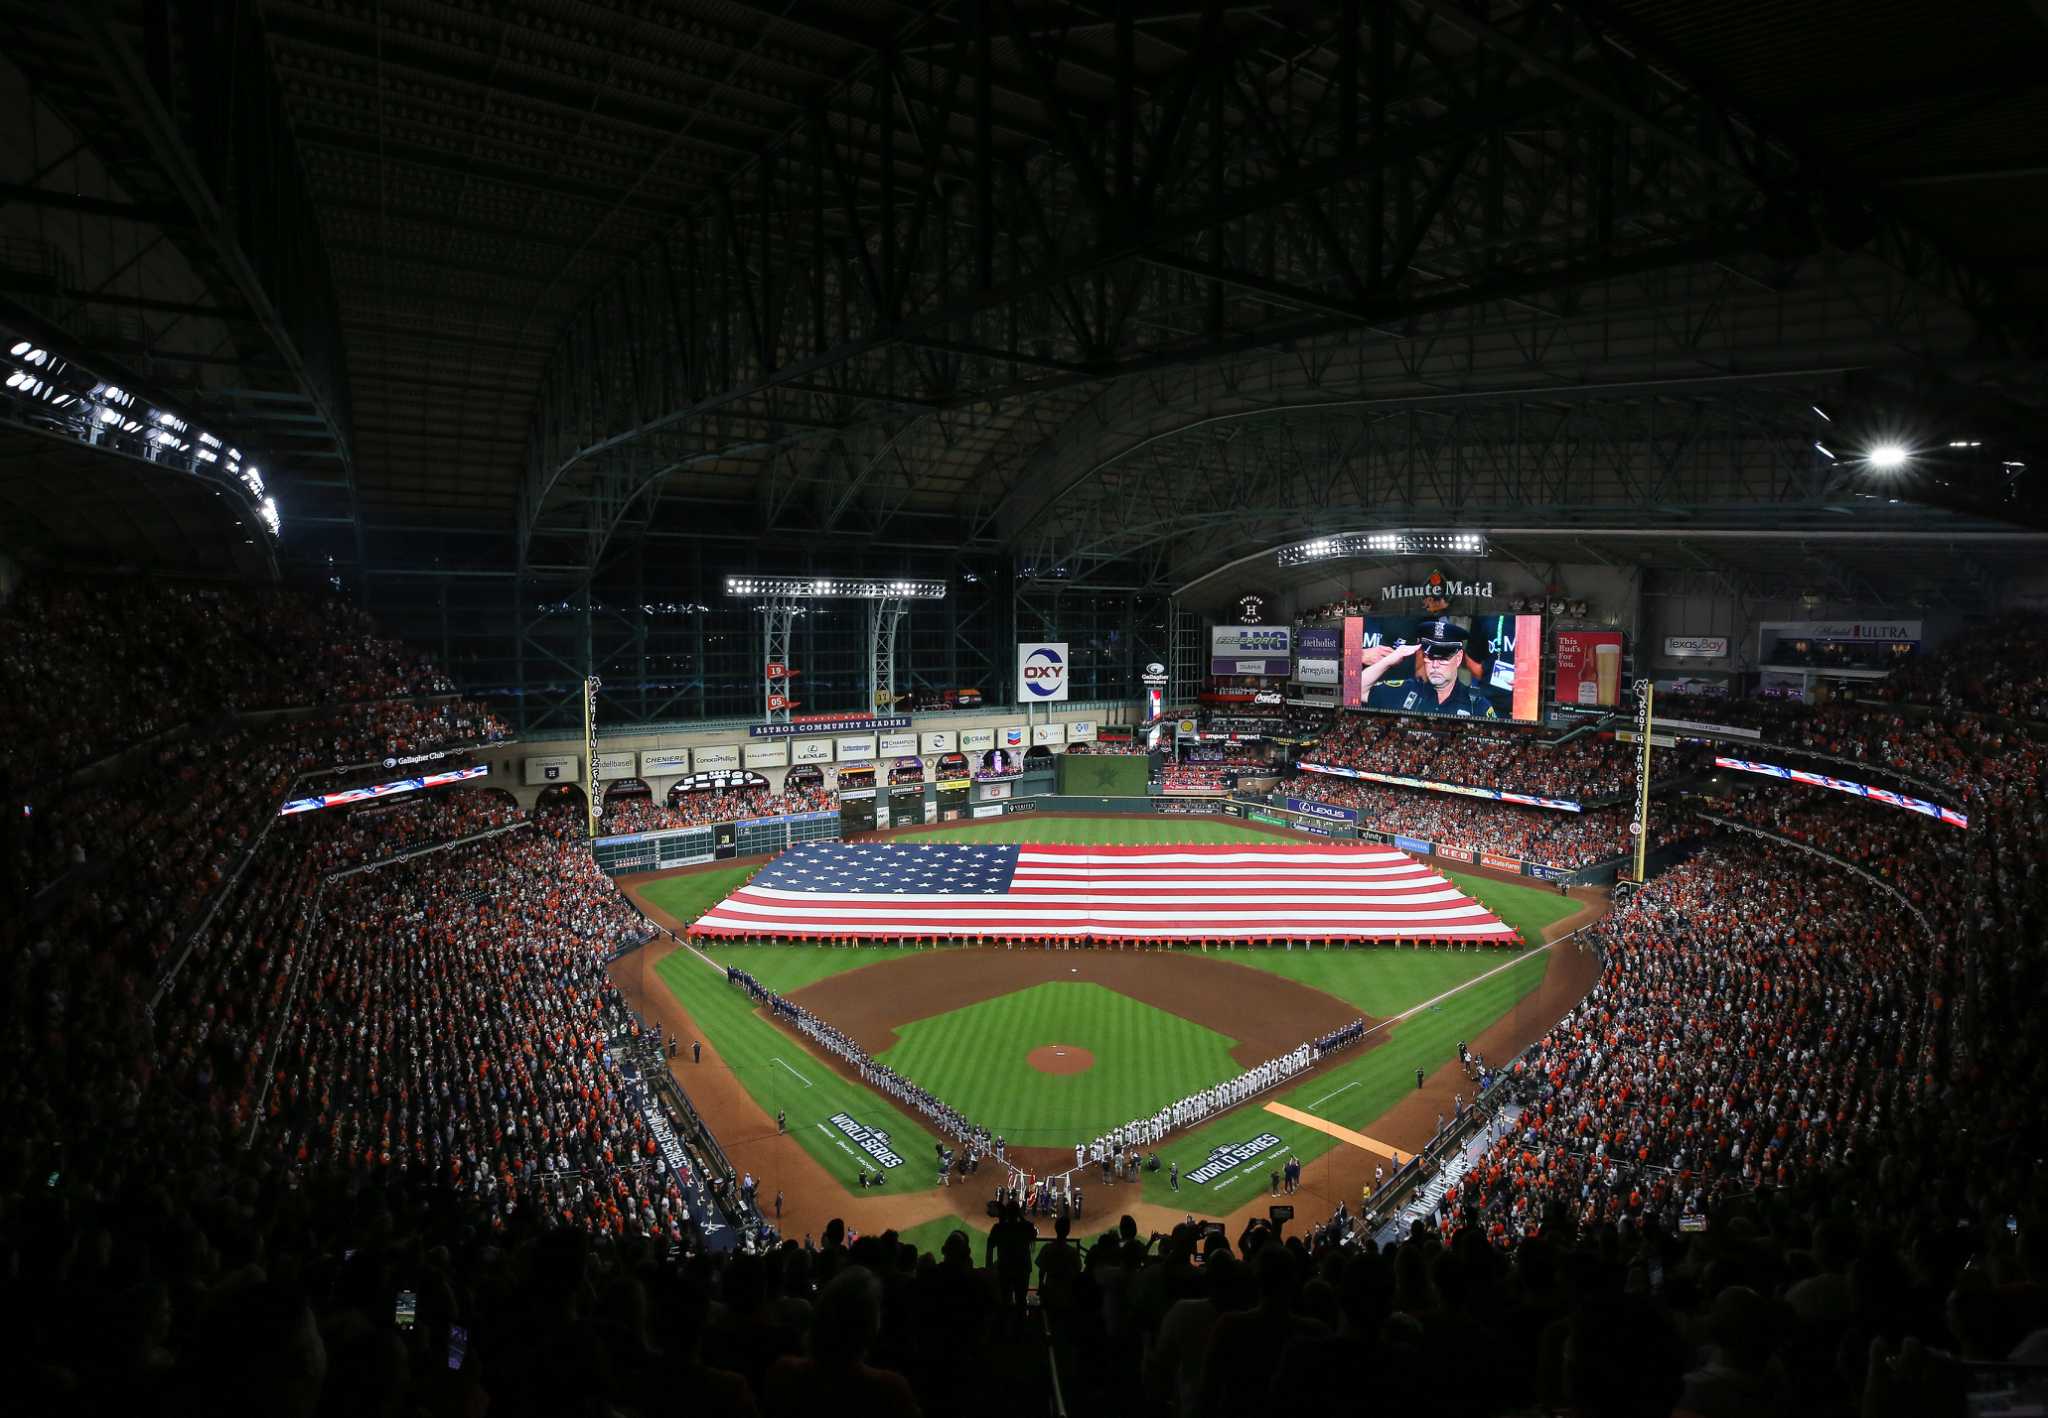 Minute Maid Park roof to be closed for Game 3